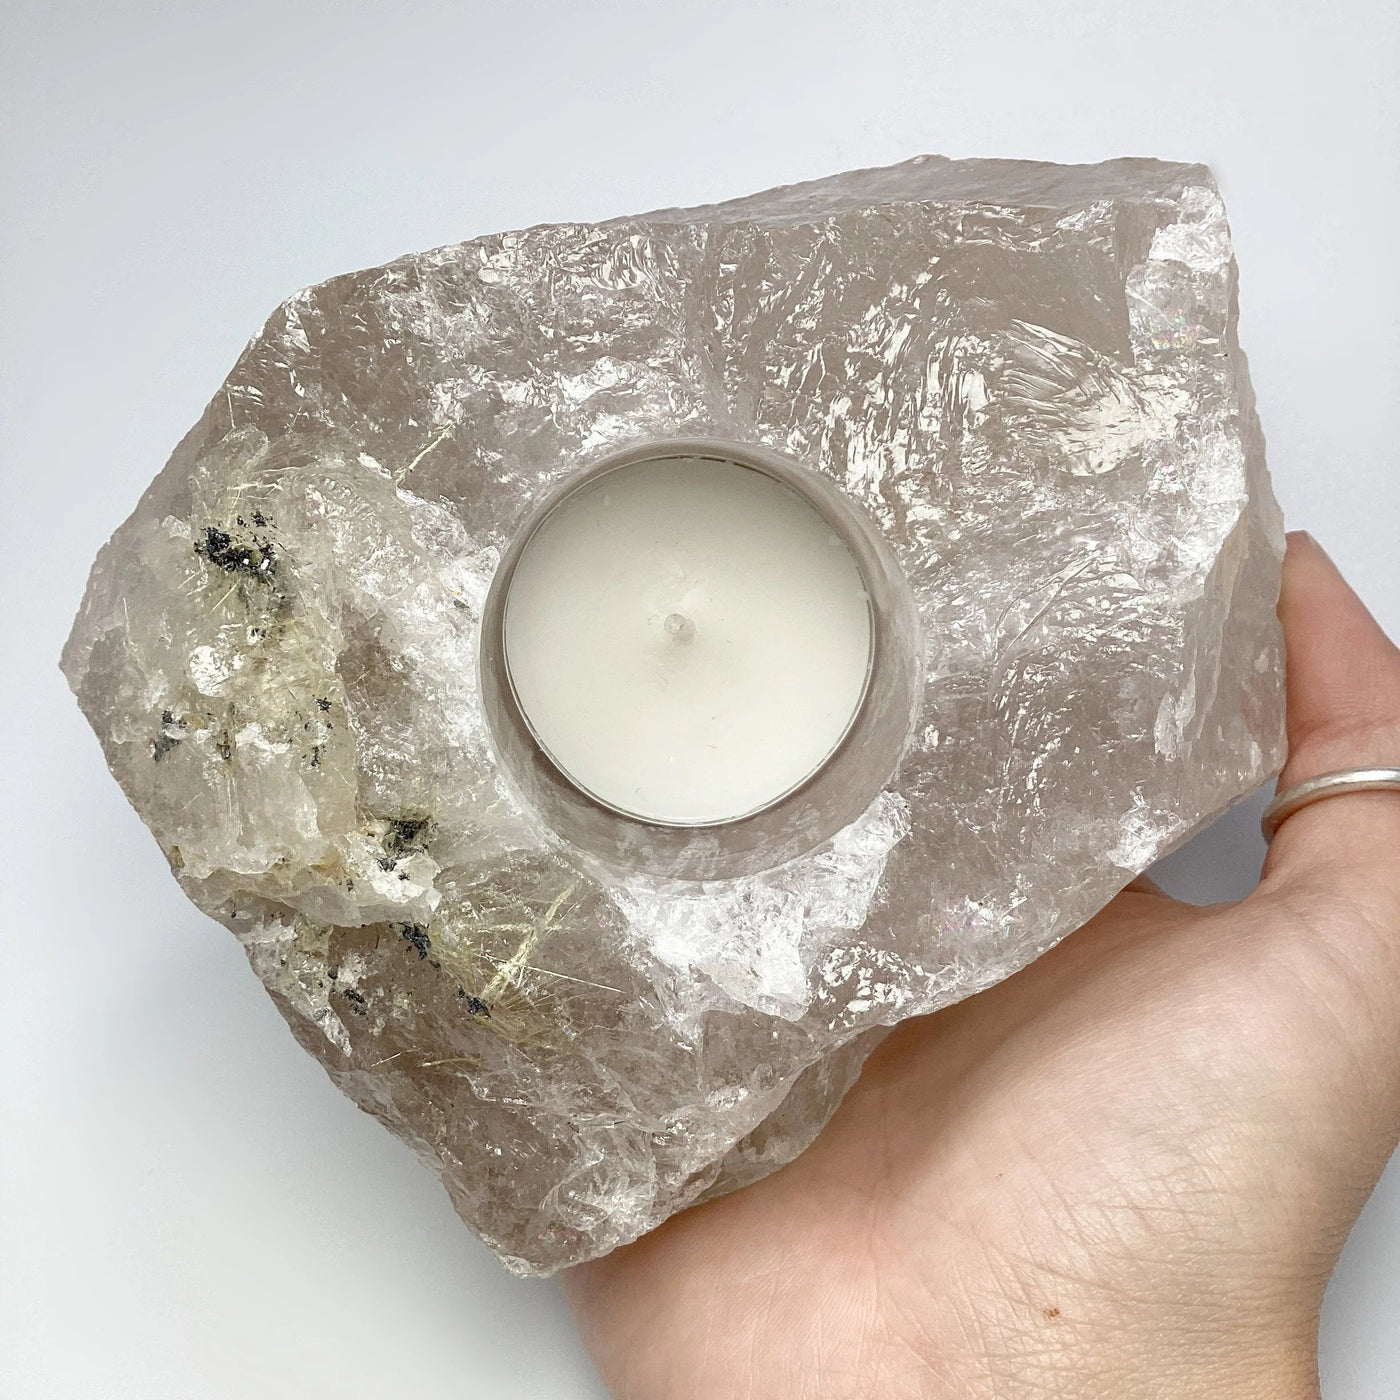 Rough Smoky Quartz with Inclusions Candle Holder